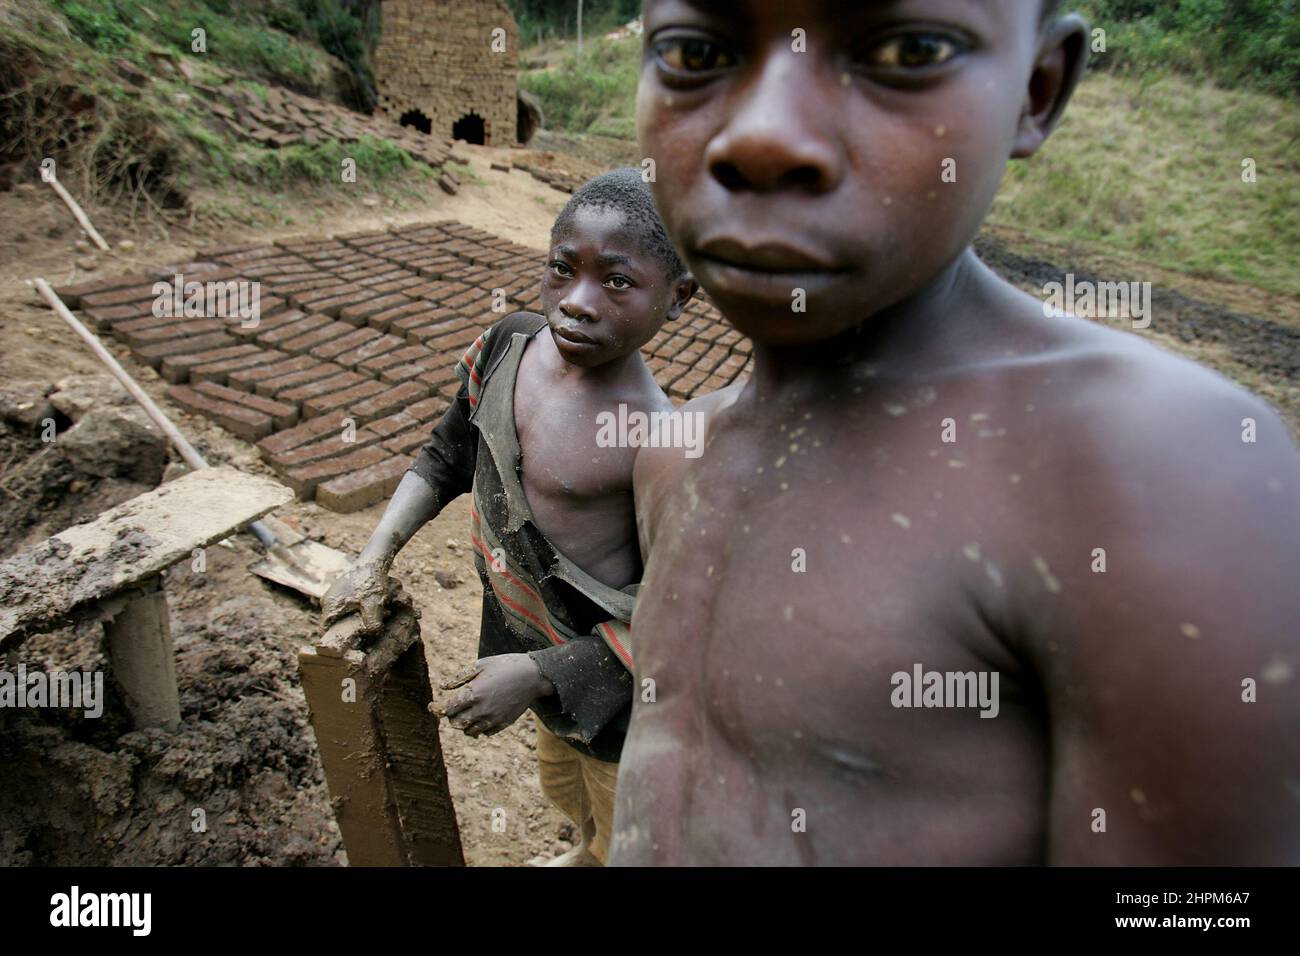 Brick manufacturing at Lake Kivu near Bukavu.  The picture is deceptive, however, as war has been waged in eastern Congo since 1996. Mai Mai warriors and Interahamwer mass murderers from Rwanda have killed over 4 million people. Stock Photo